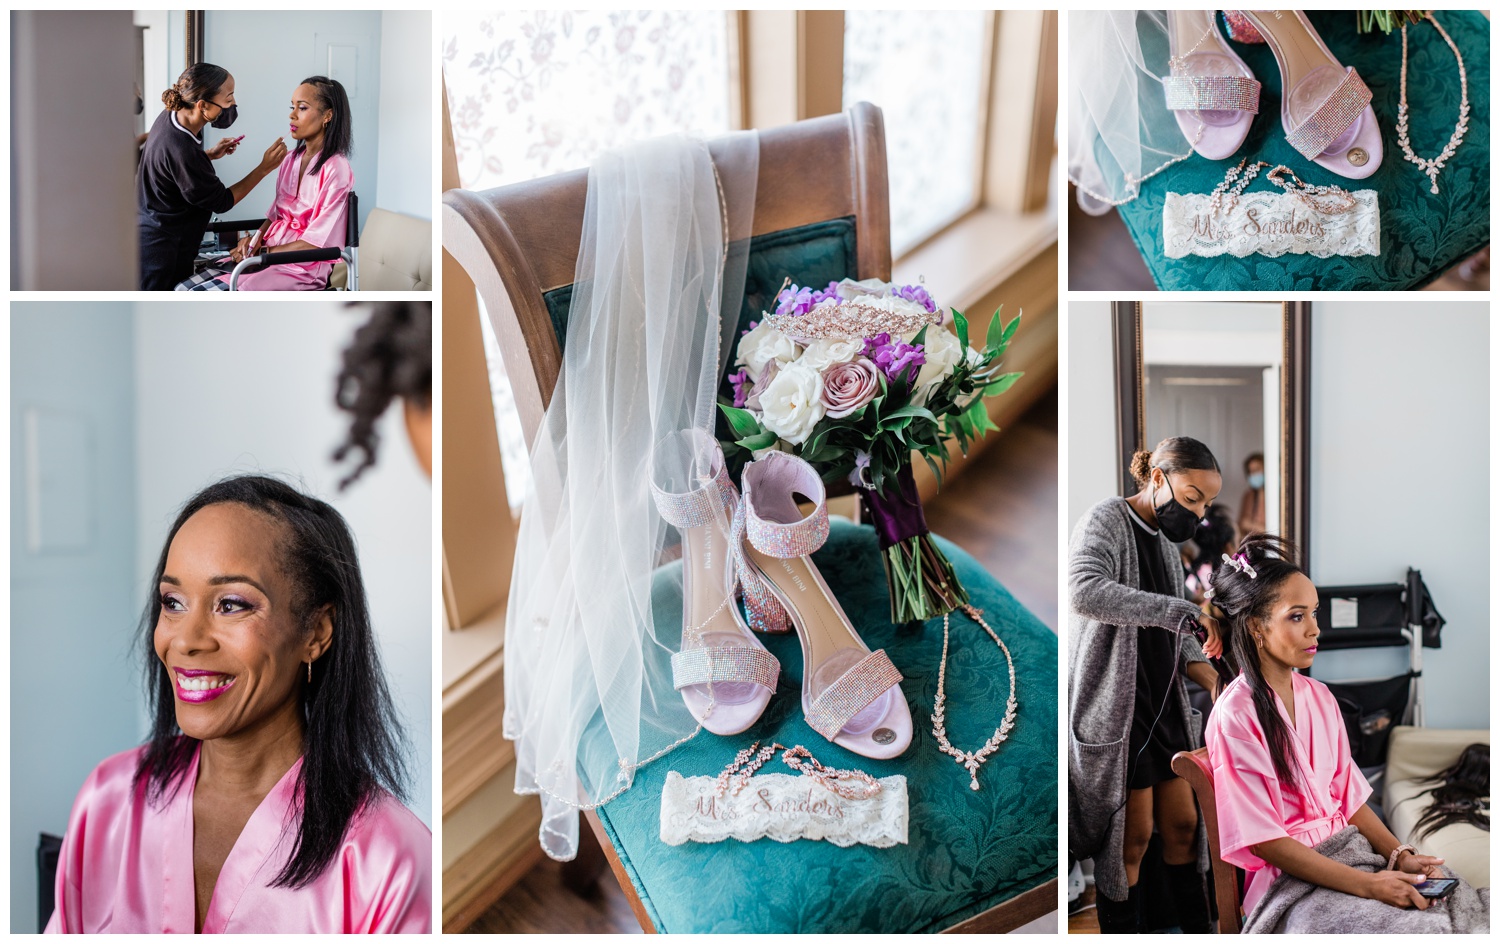 Getting ready photos - Savannah Elopement Package - Hair and makeup by Royal Makeup and Hair